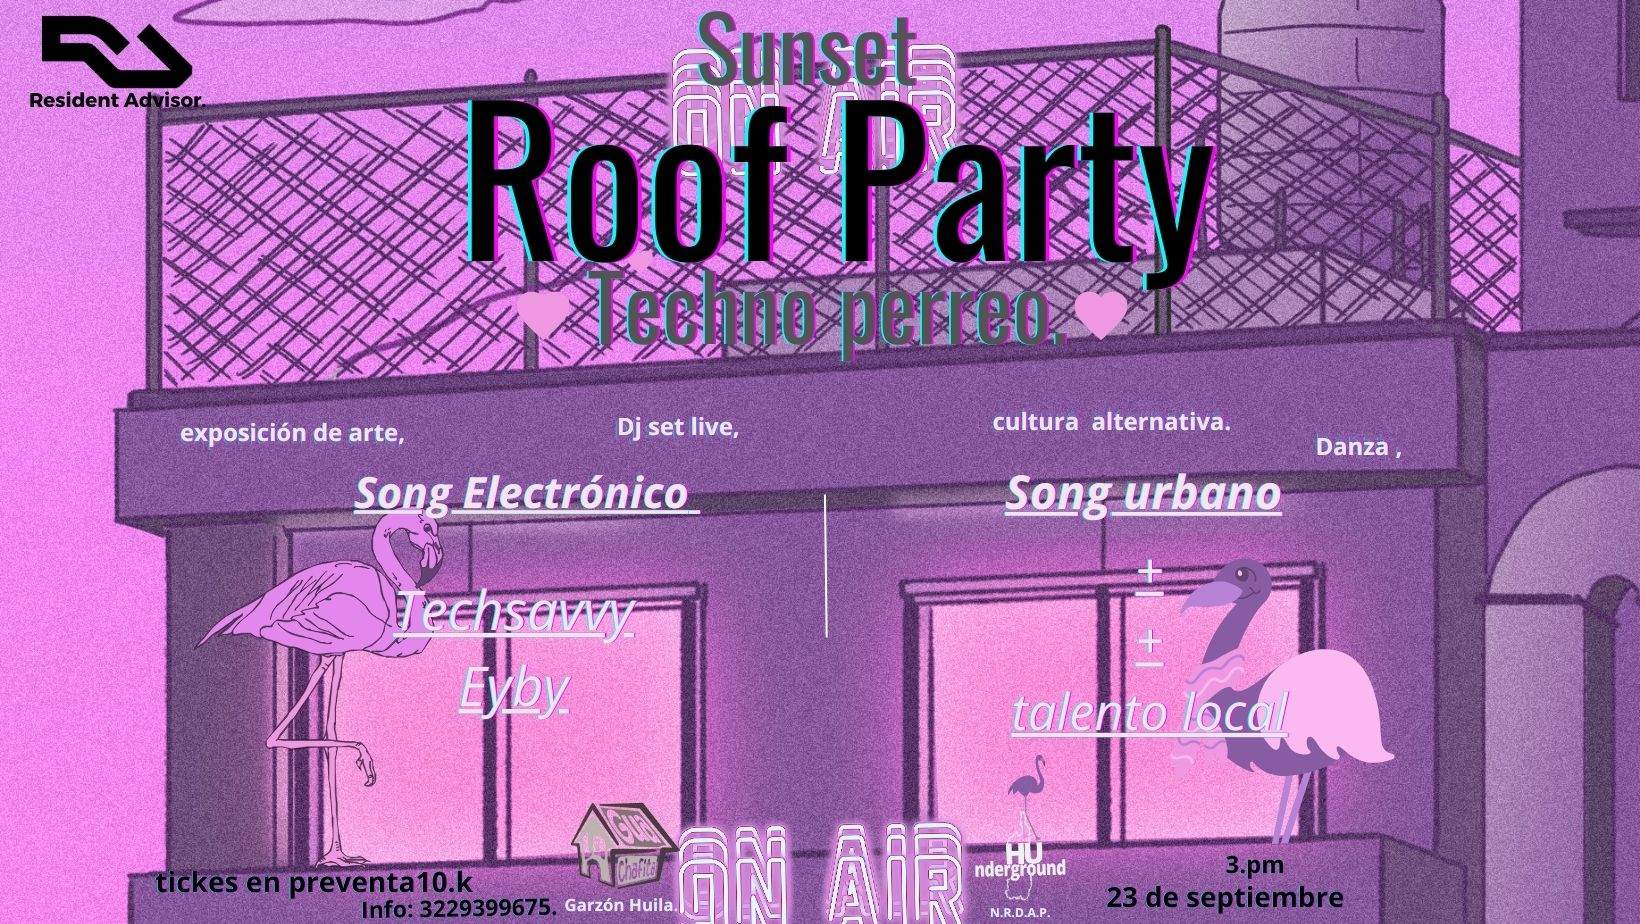 Sunset Roof Party - フライヤー表